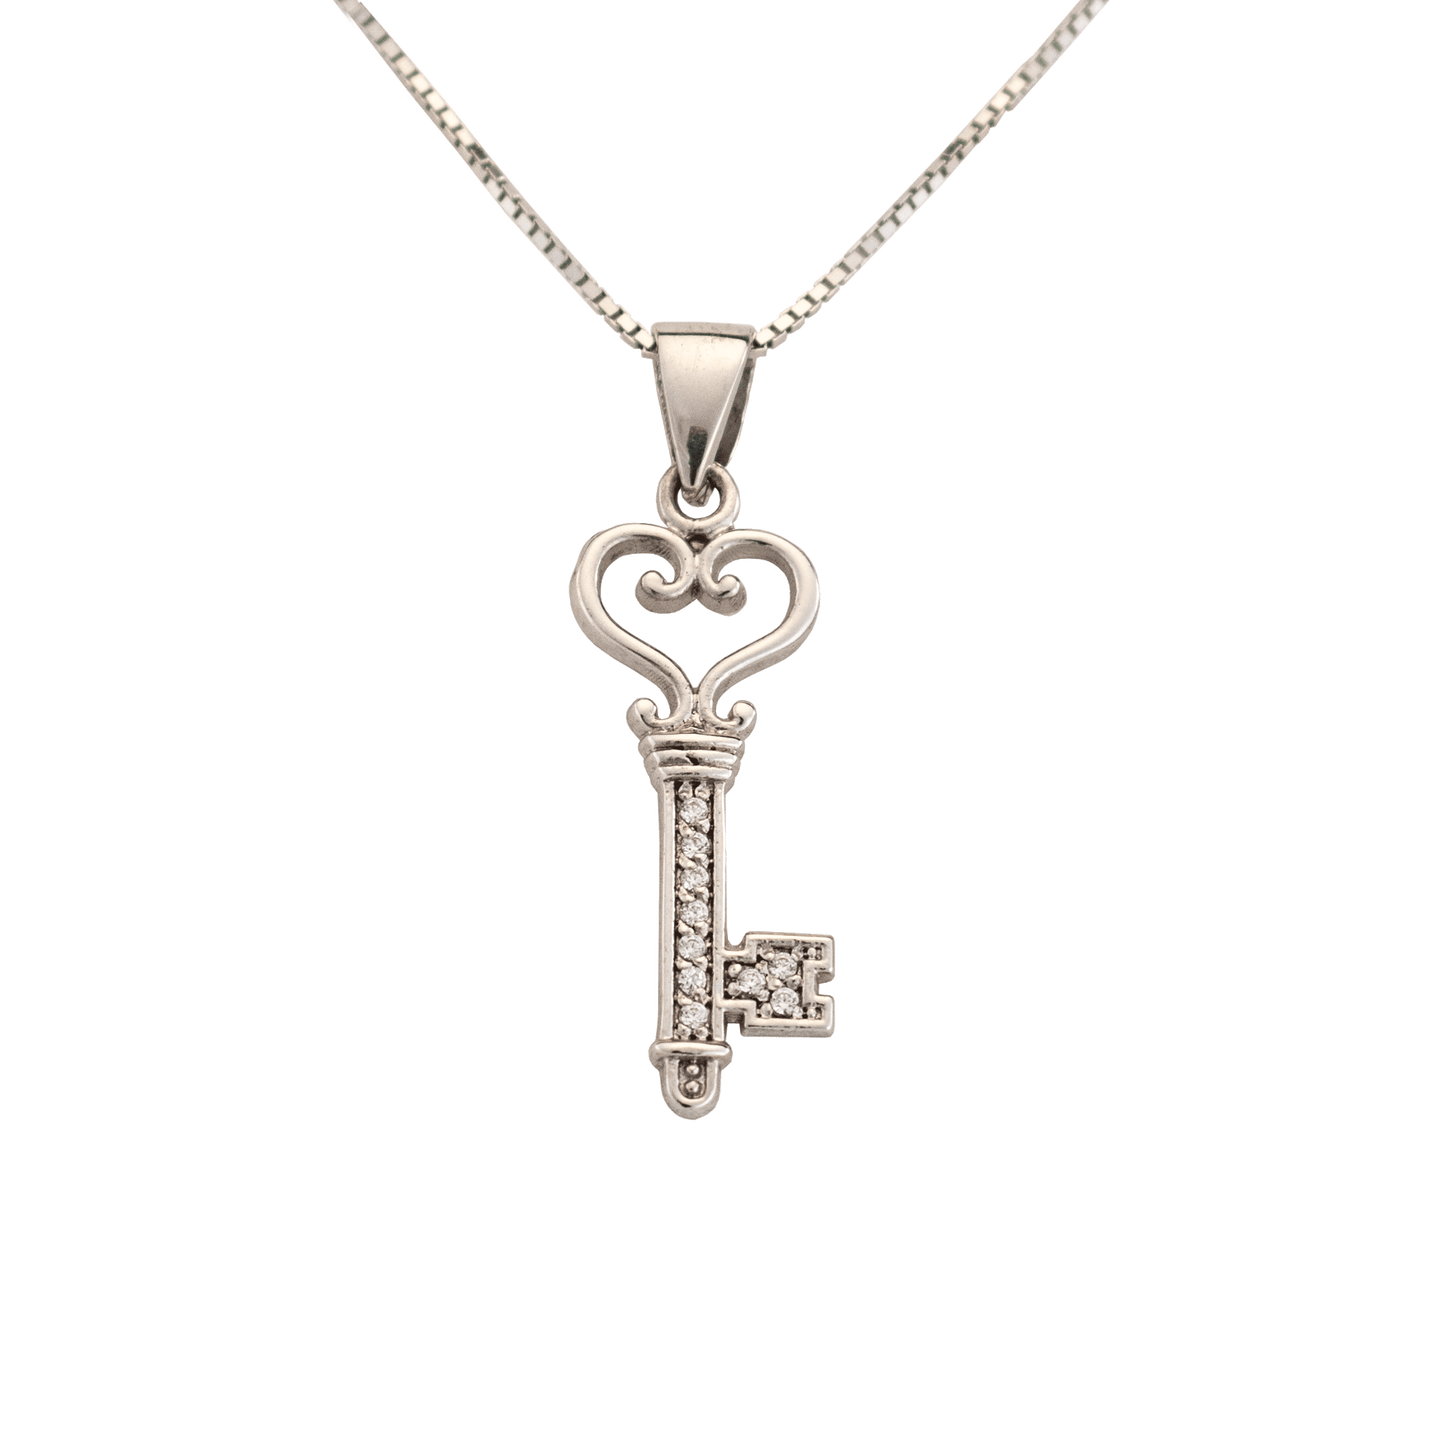 Bejeweled silver heart key pendant on a silver chain